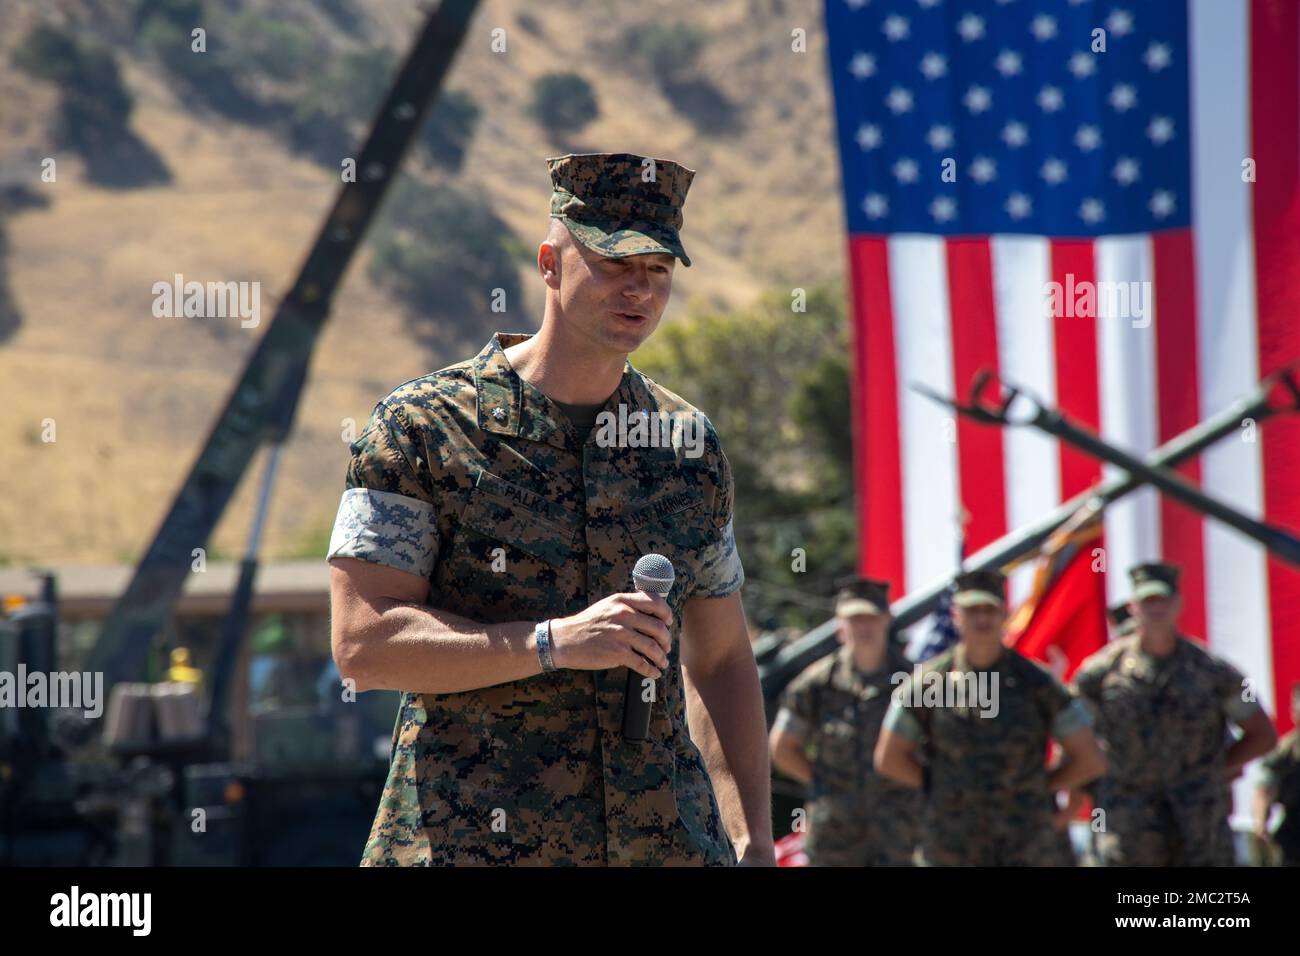 U.S. Marine Corps Lt. Col. David J. Palka, the incoming commanding officer of 1st Battalion, 11th Marine Regiment (1/11), 1st Marine Division, gives his closing remarks after receiving the unit colors during a change of command ceremony at Marine Corps Base Camp Pendleton, California, June 24, 2022. During the ceremony, Lt. Col. Matthew T. Ritchie relinquished command of 1/11 to Palka. Stock Photo